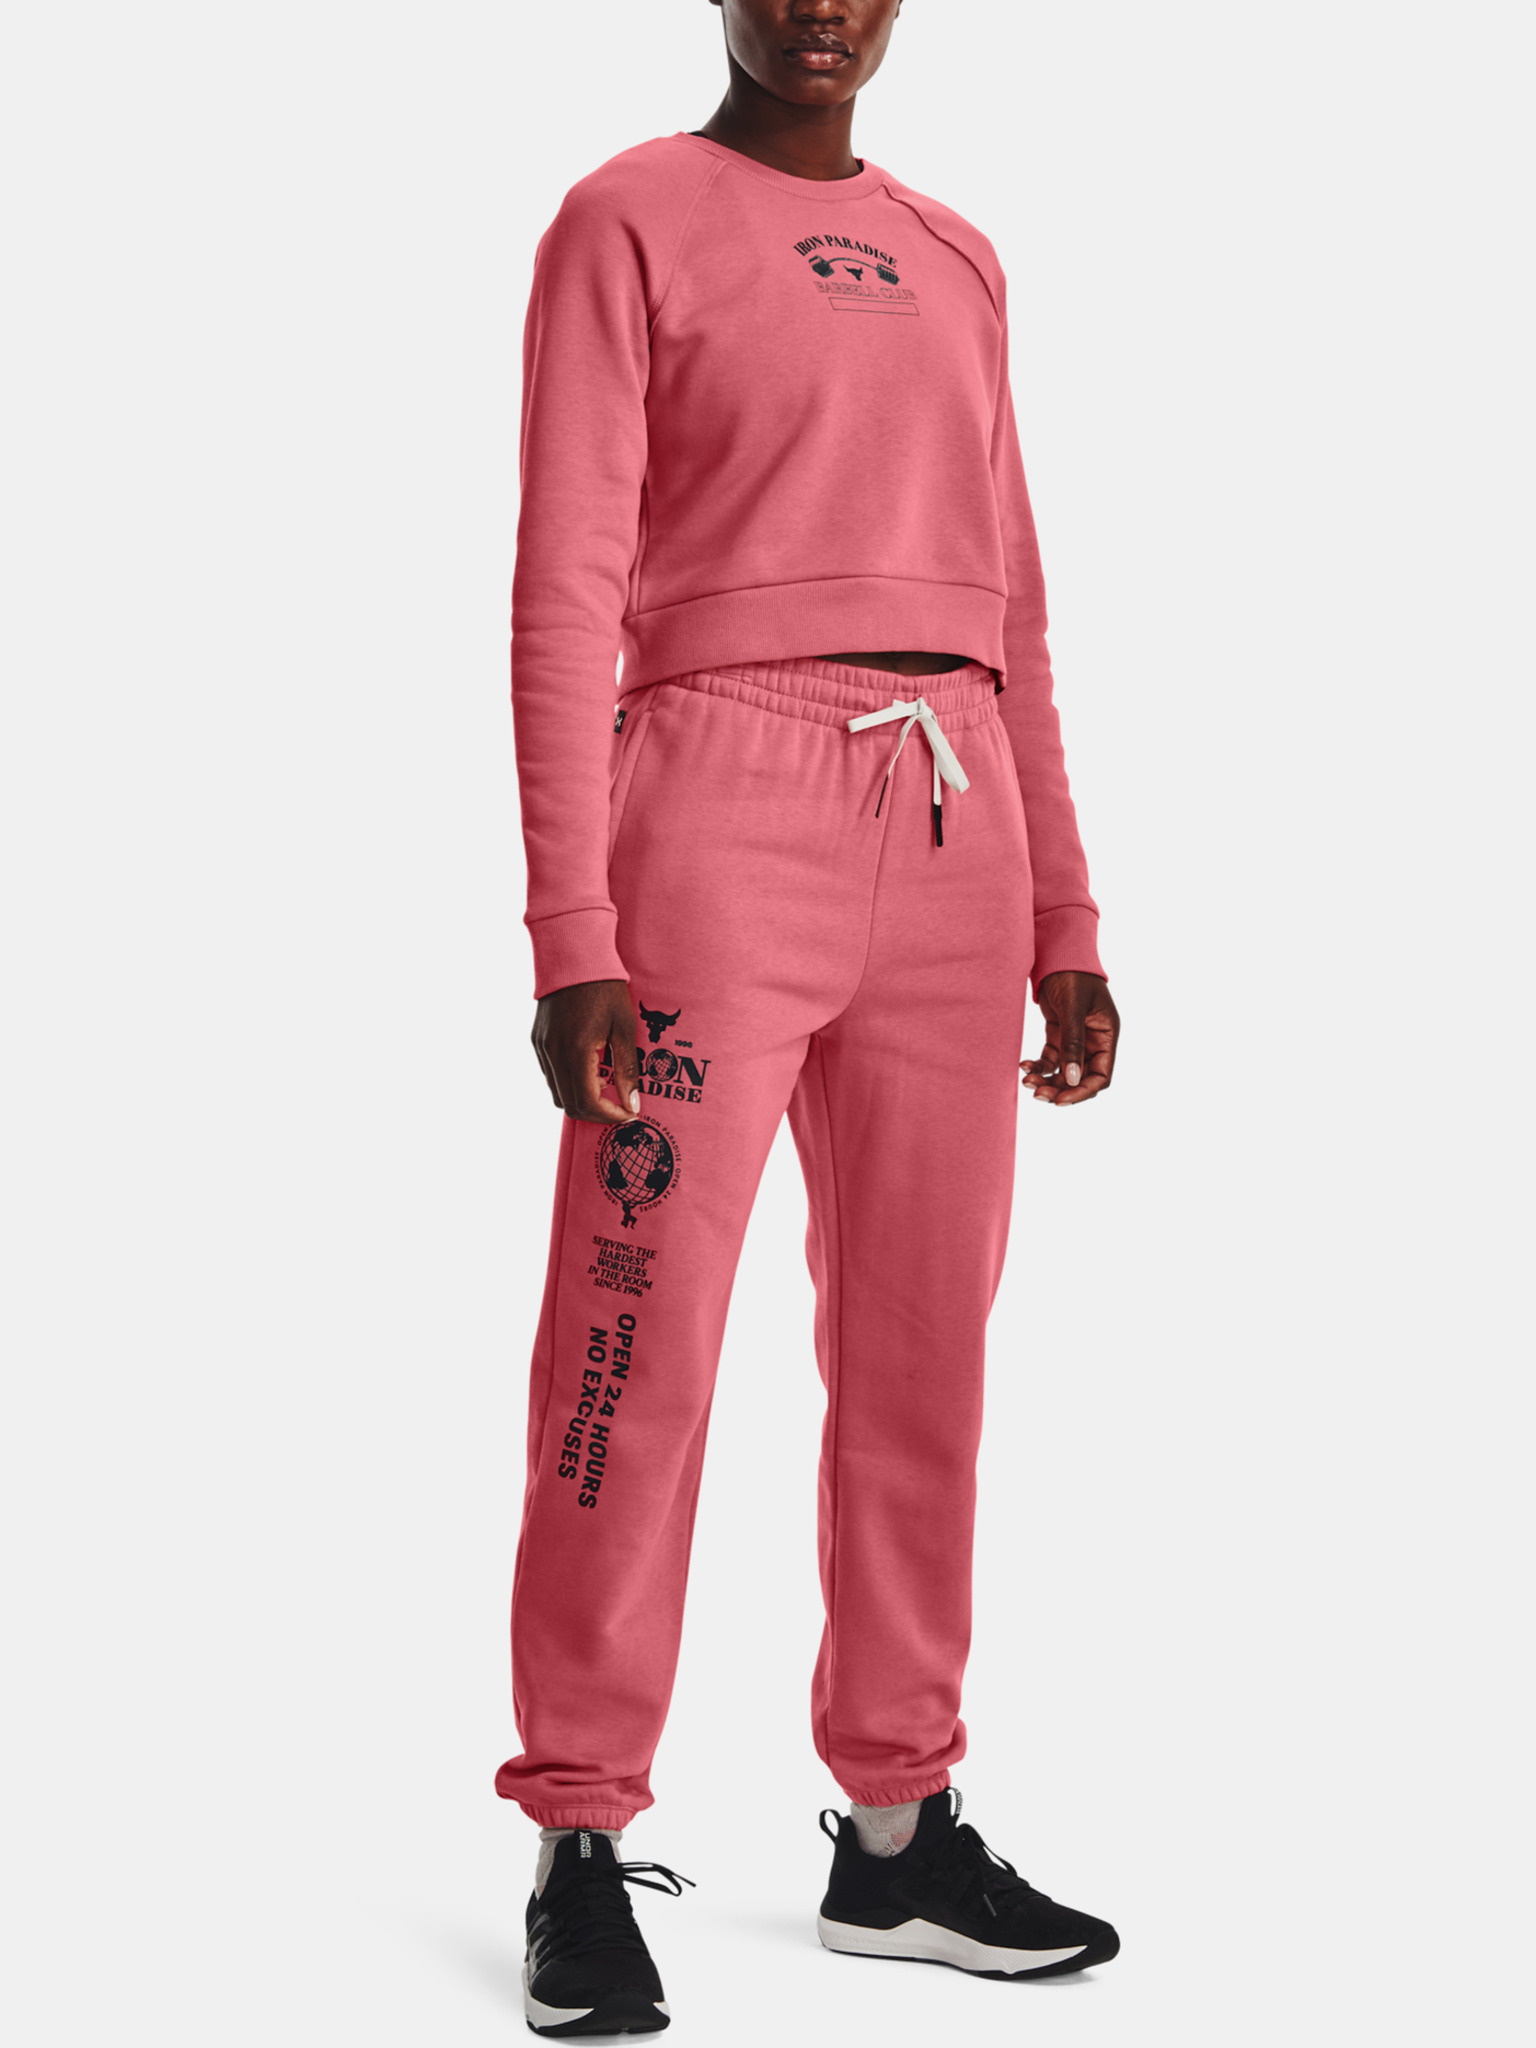 Under Armour Sweatpants Womens Small Pink Joggers Protect This House  Loungewear